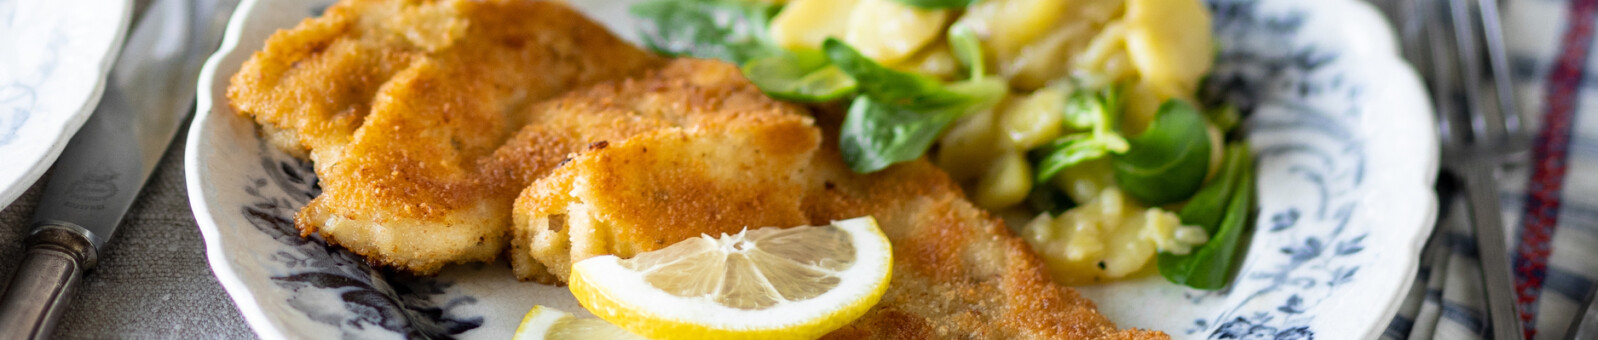     Wiener Schnitzel (a breaded and fried veal escalope) 